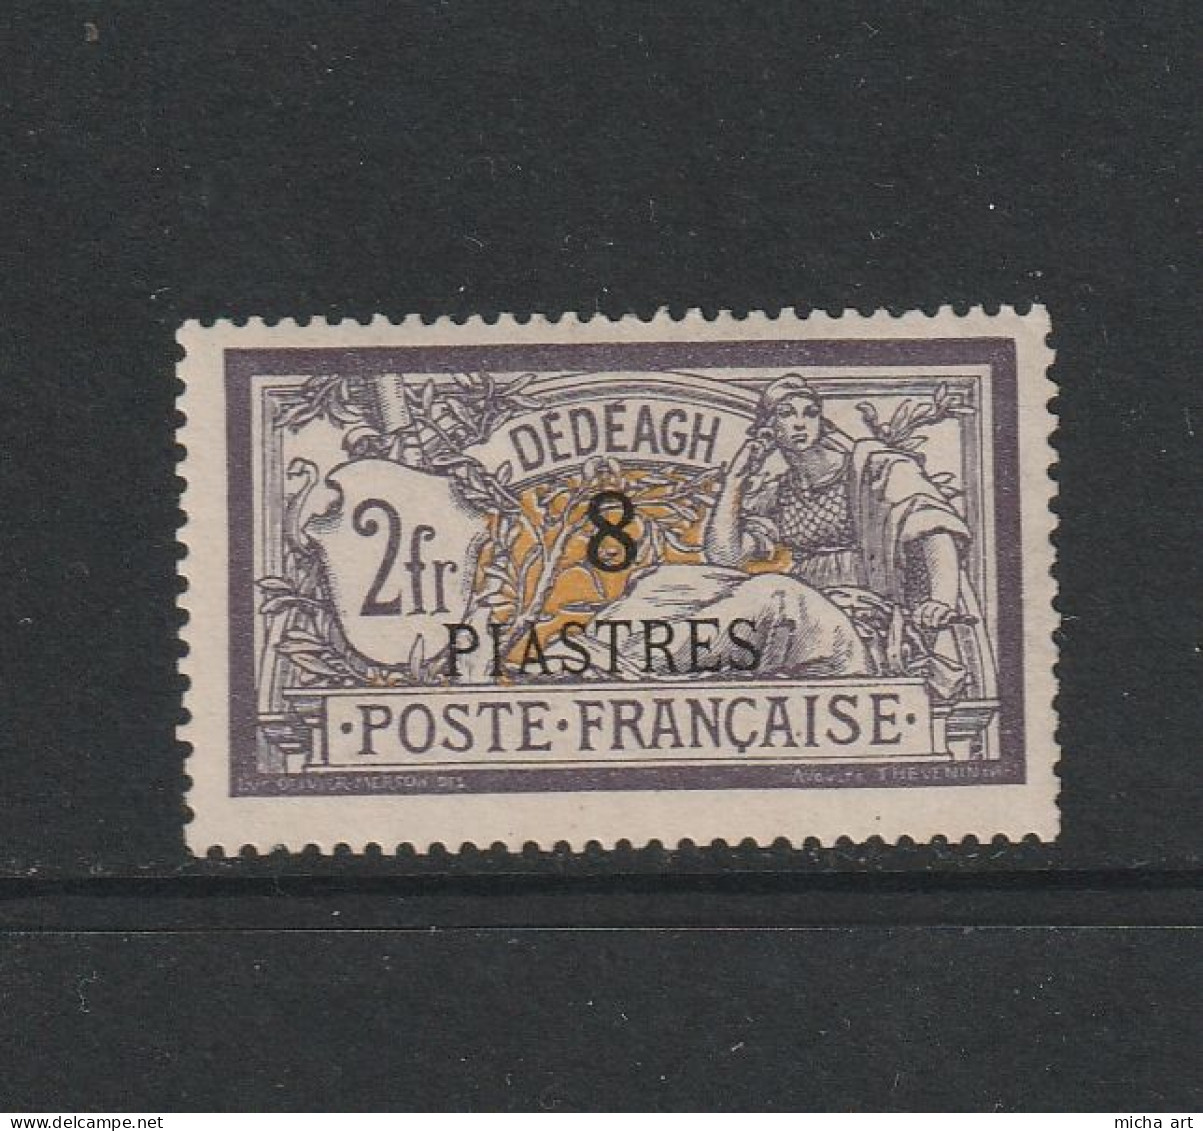 Greece French Post Office 1902 - 1913 Dedeagh Issue 8 Pi / 2 F. MH W1101 - Neufs